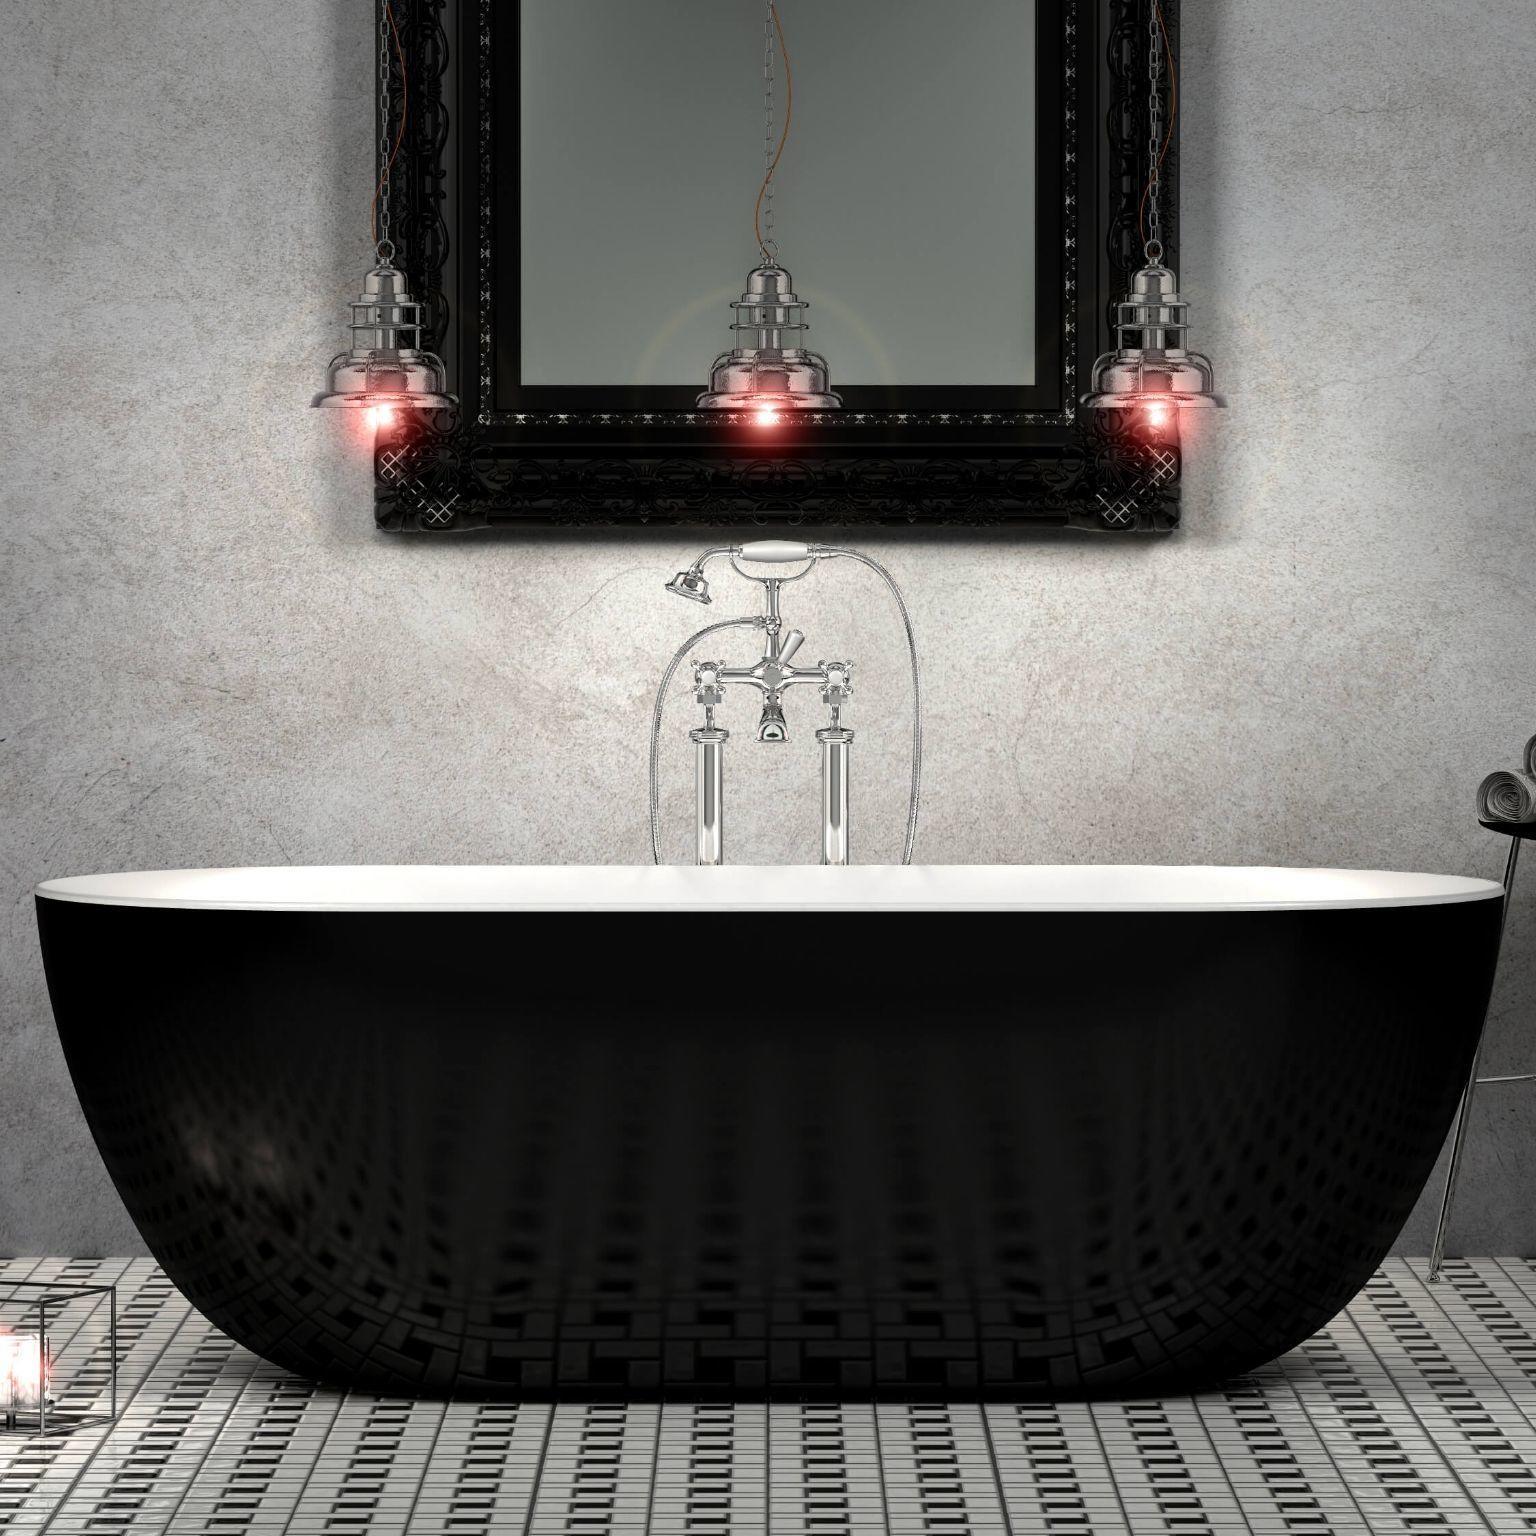 Top 5 Small Clawfoot Tubs for Small Bathrooms - Luxury Freestanding Tubs